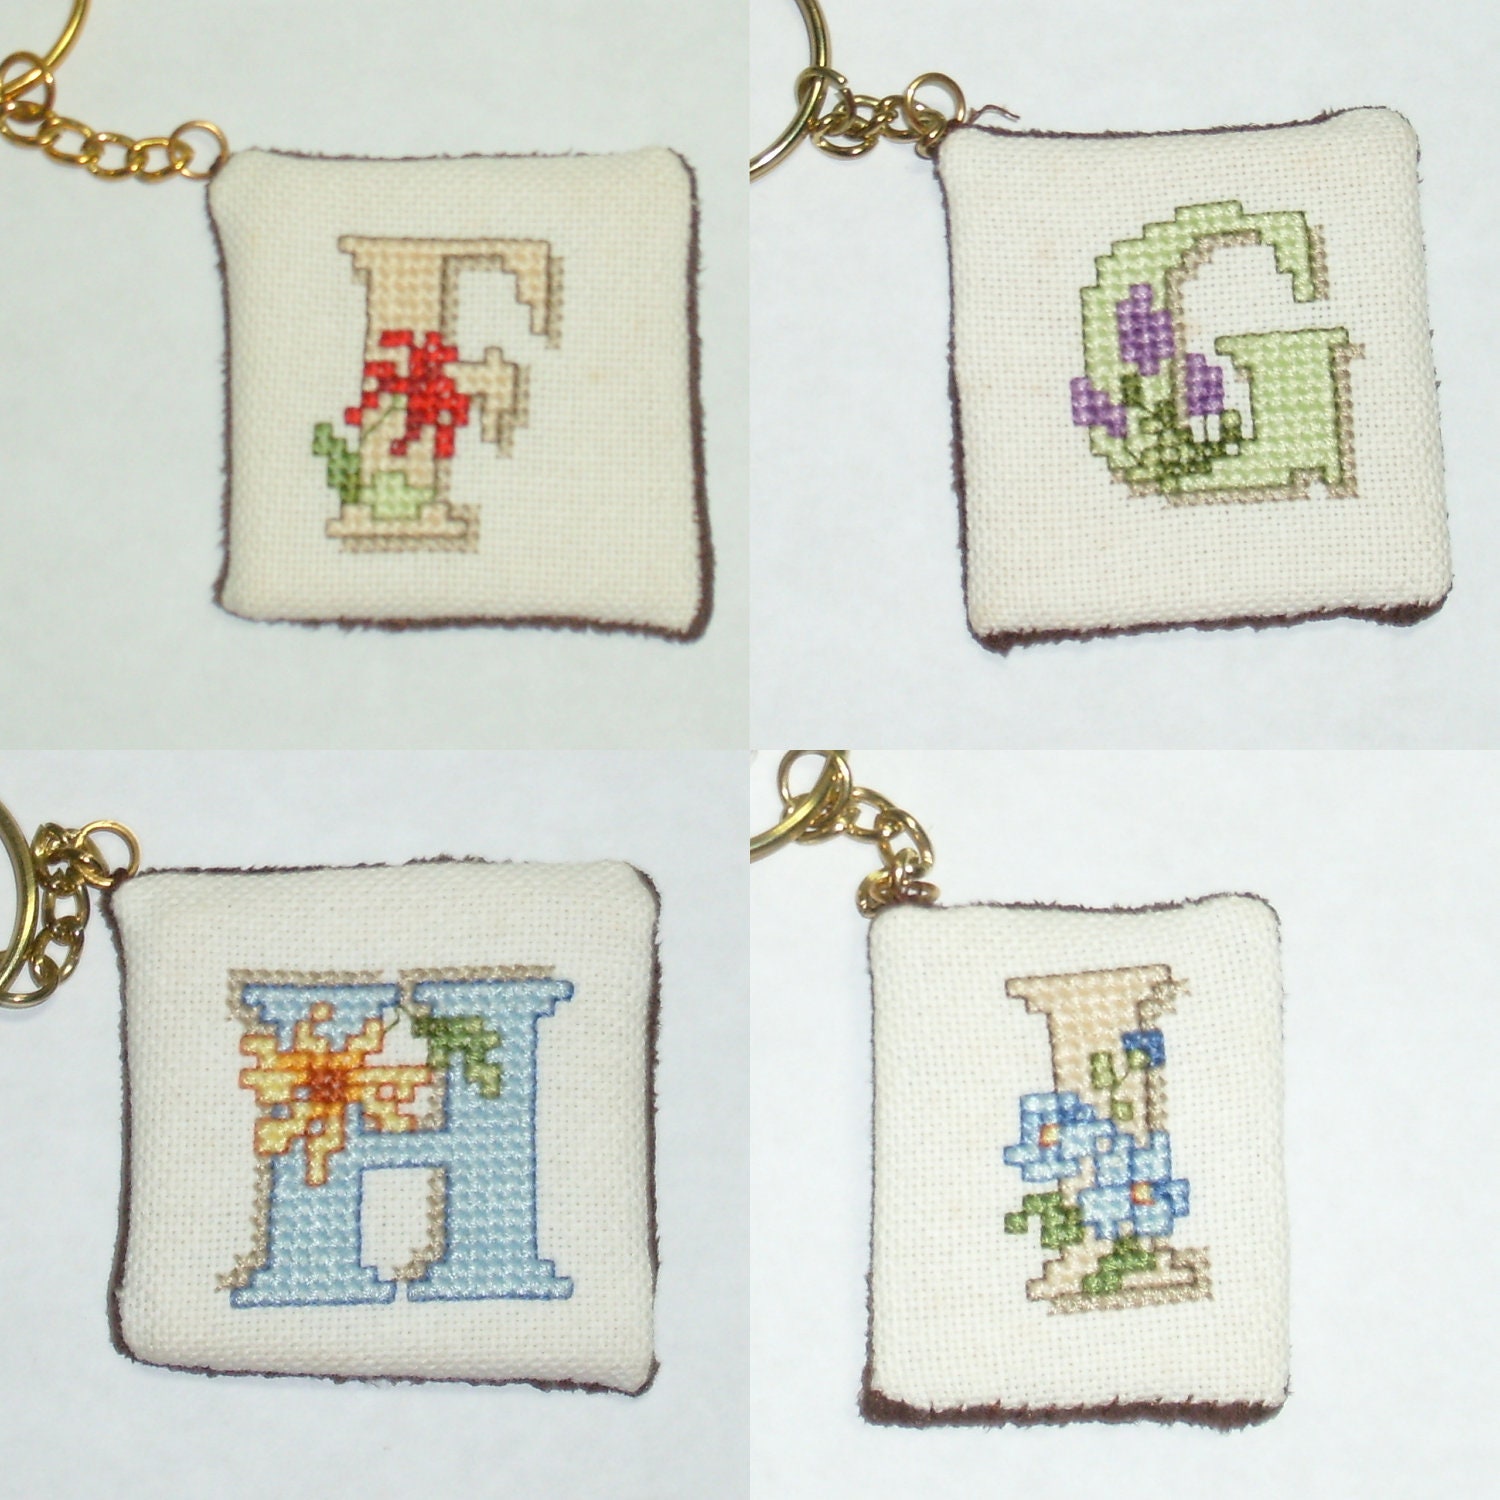 irenesmemorystitches Initial Cross Stitch Key Chains